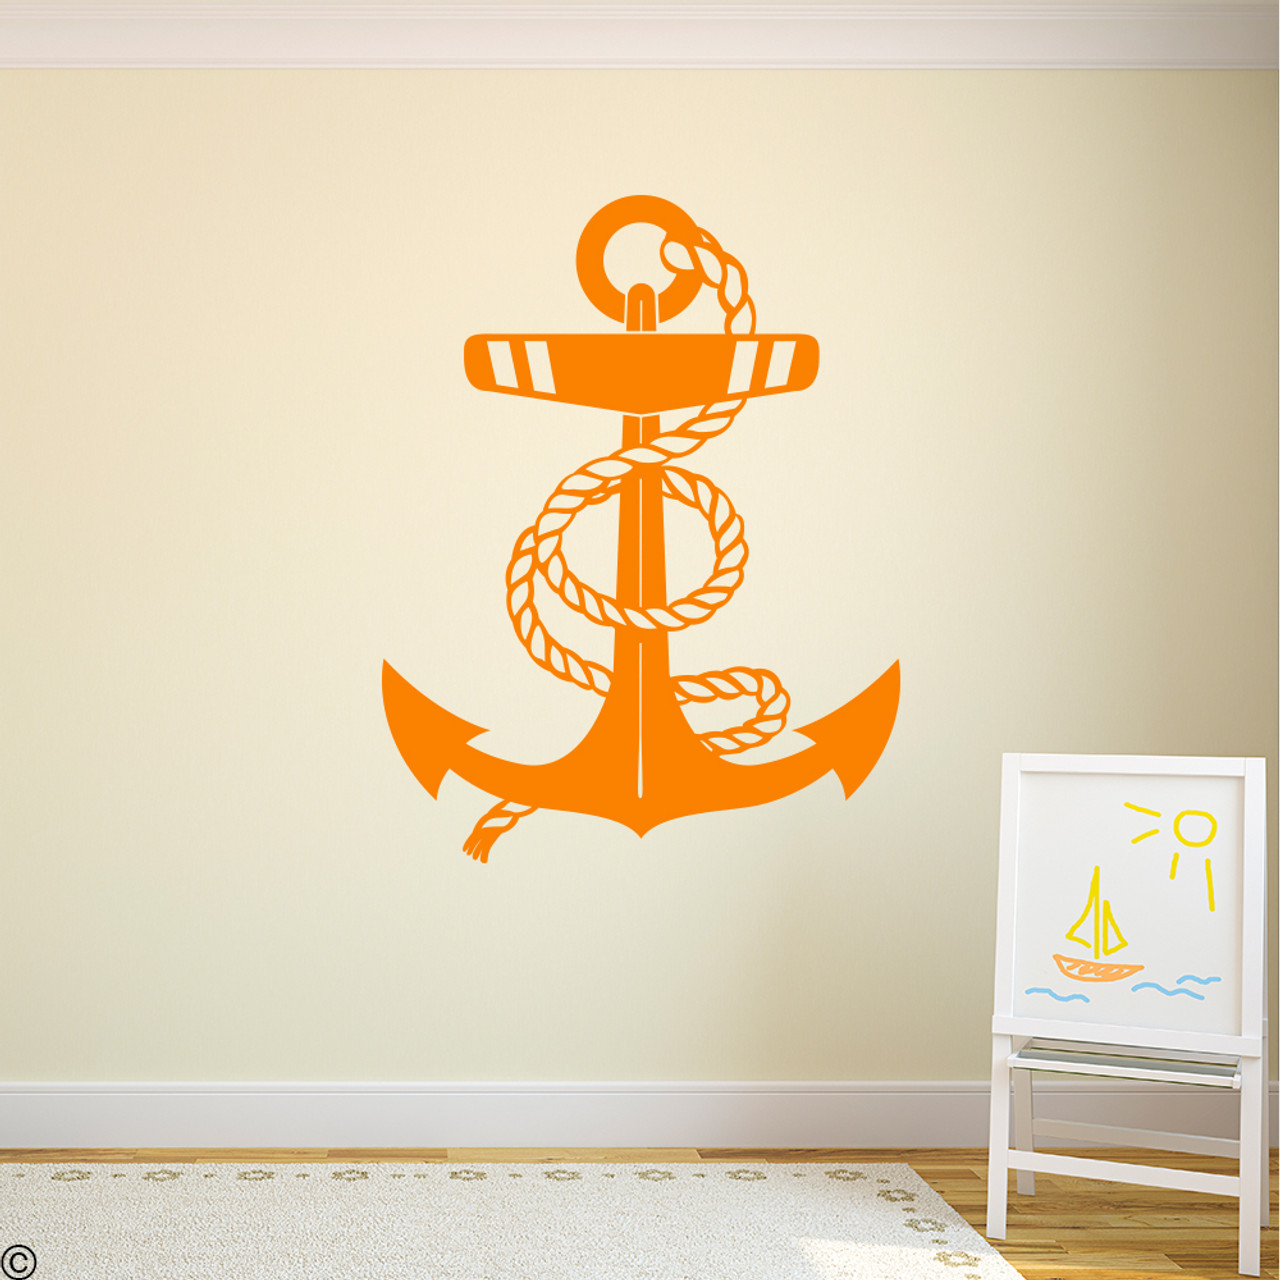 Anchor wall decal in persimmon